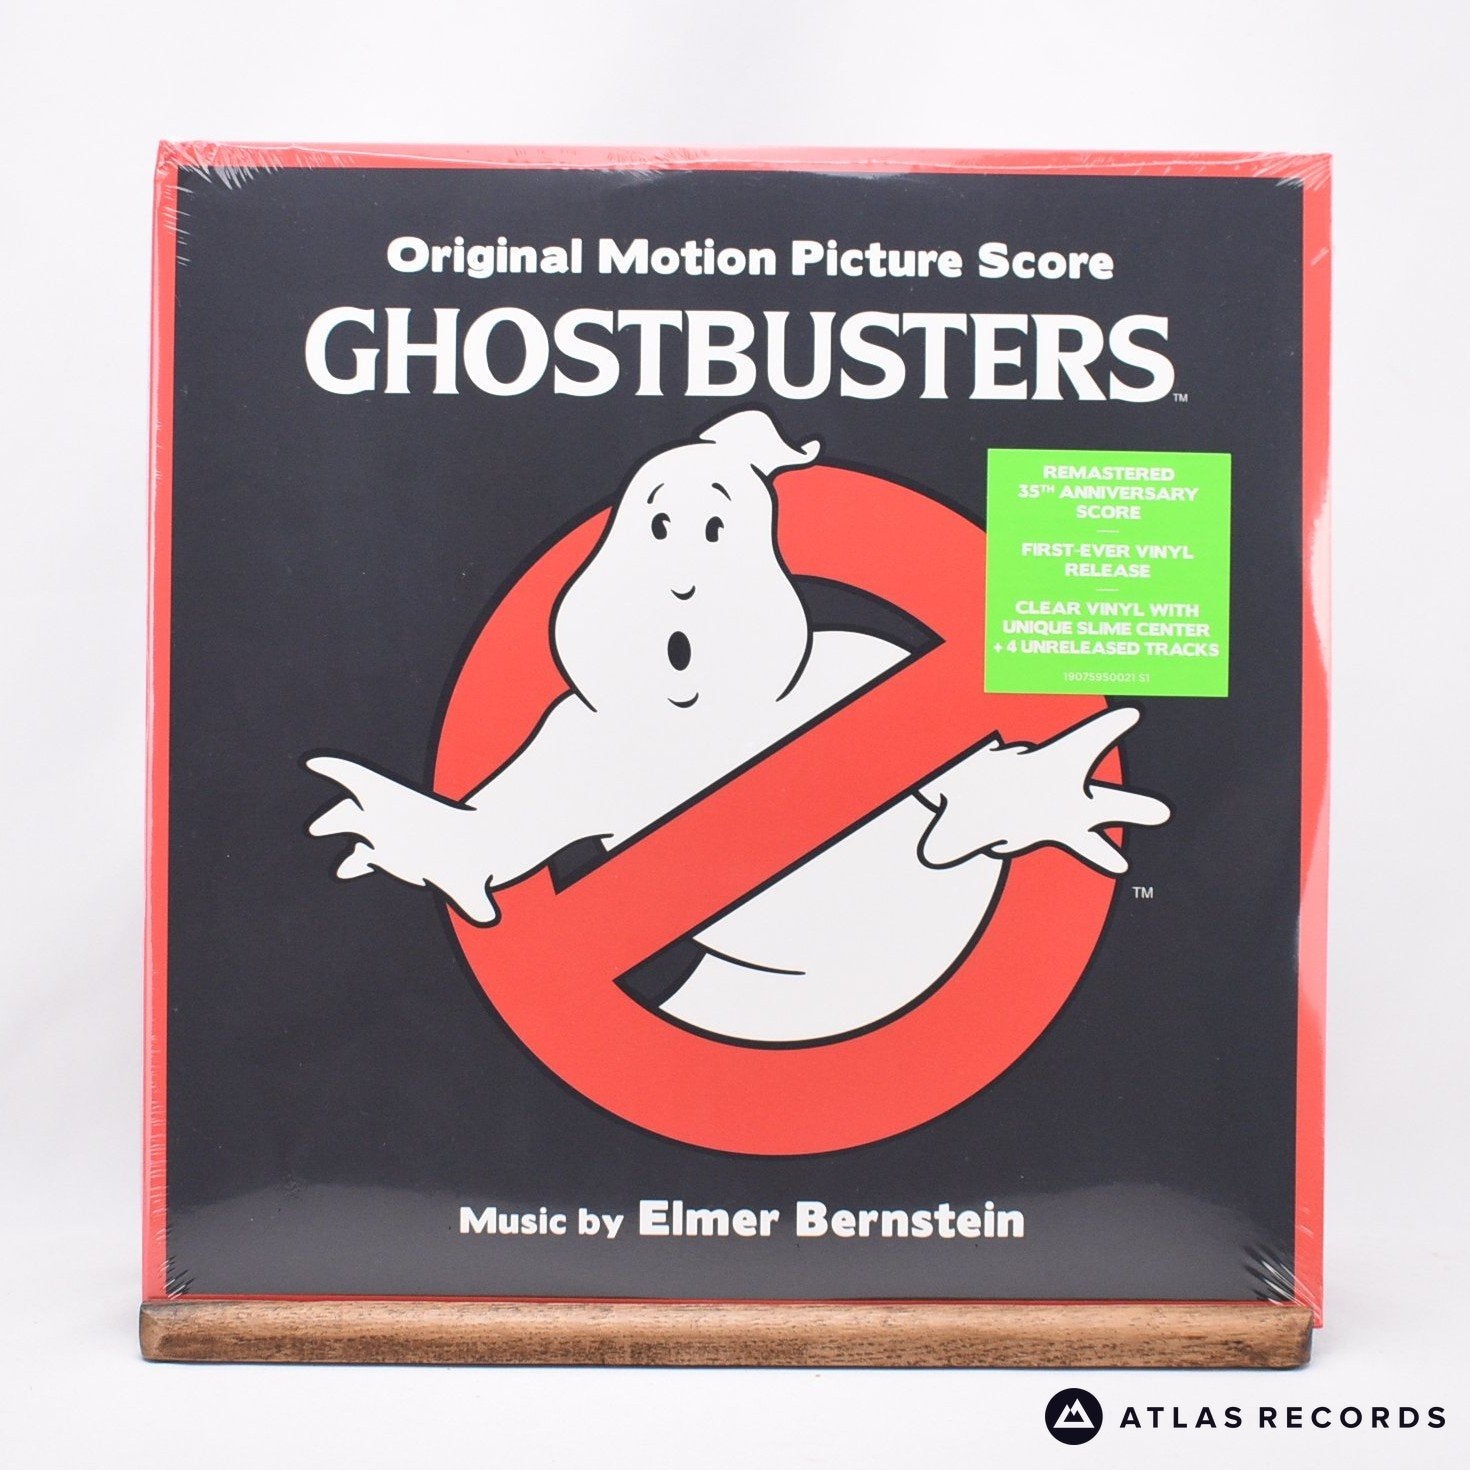 Ghostbusters LP with a green hyper sticker